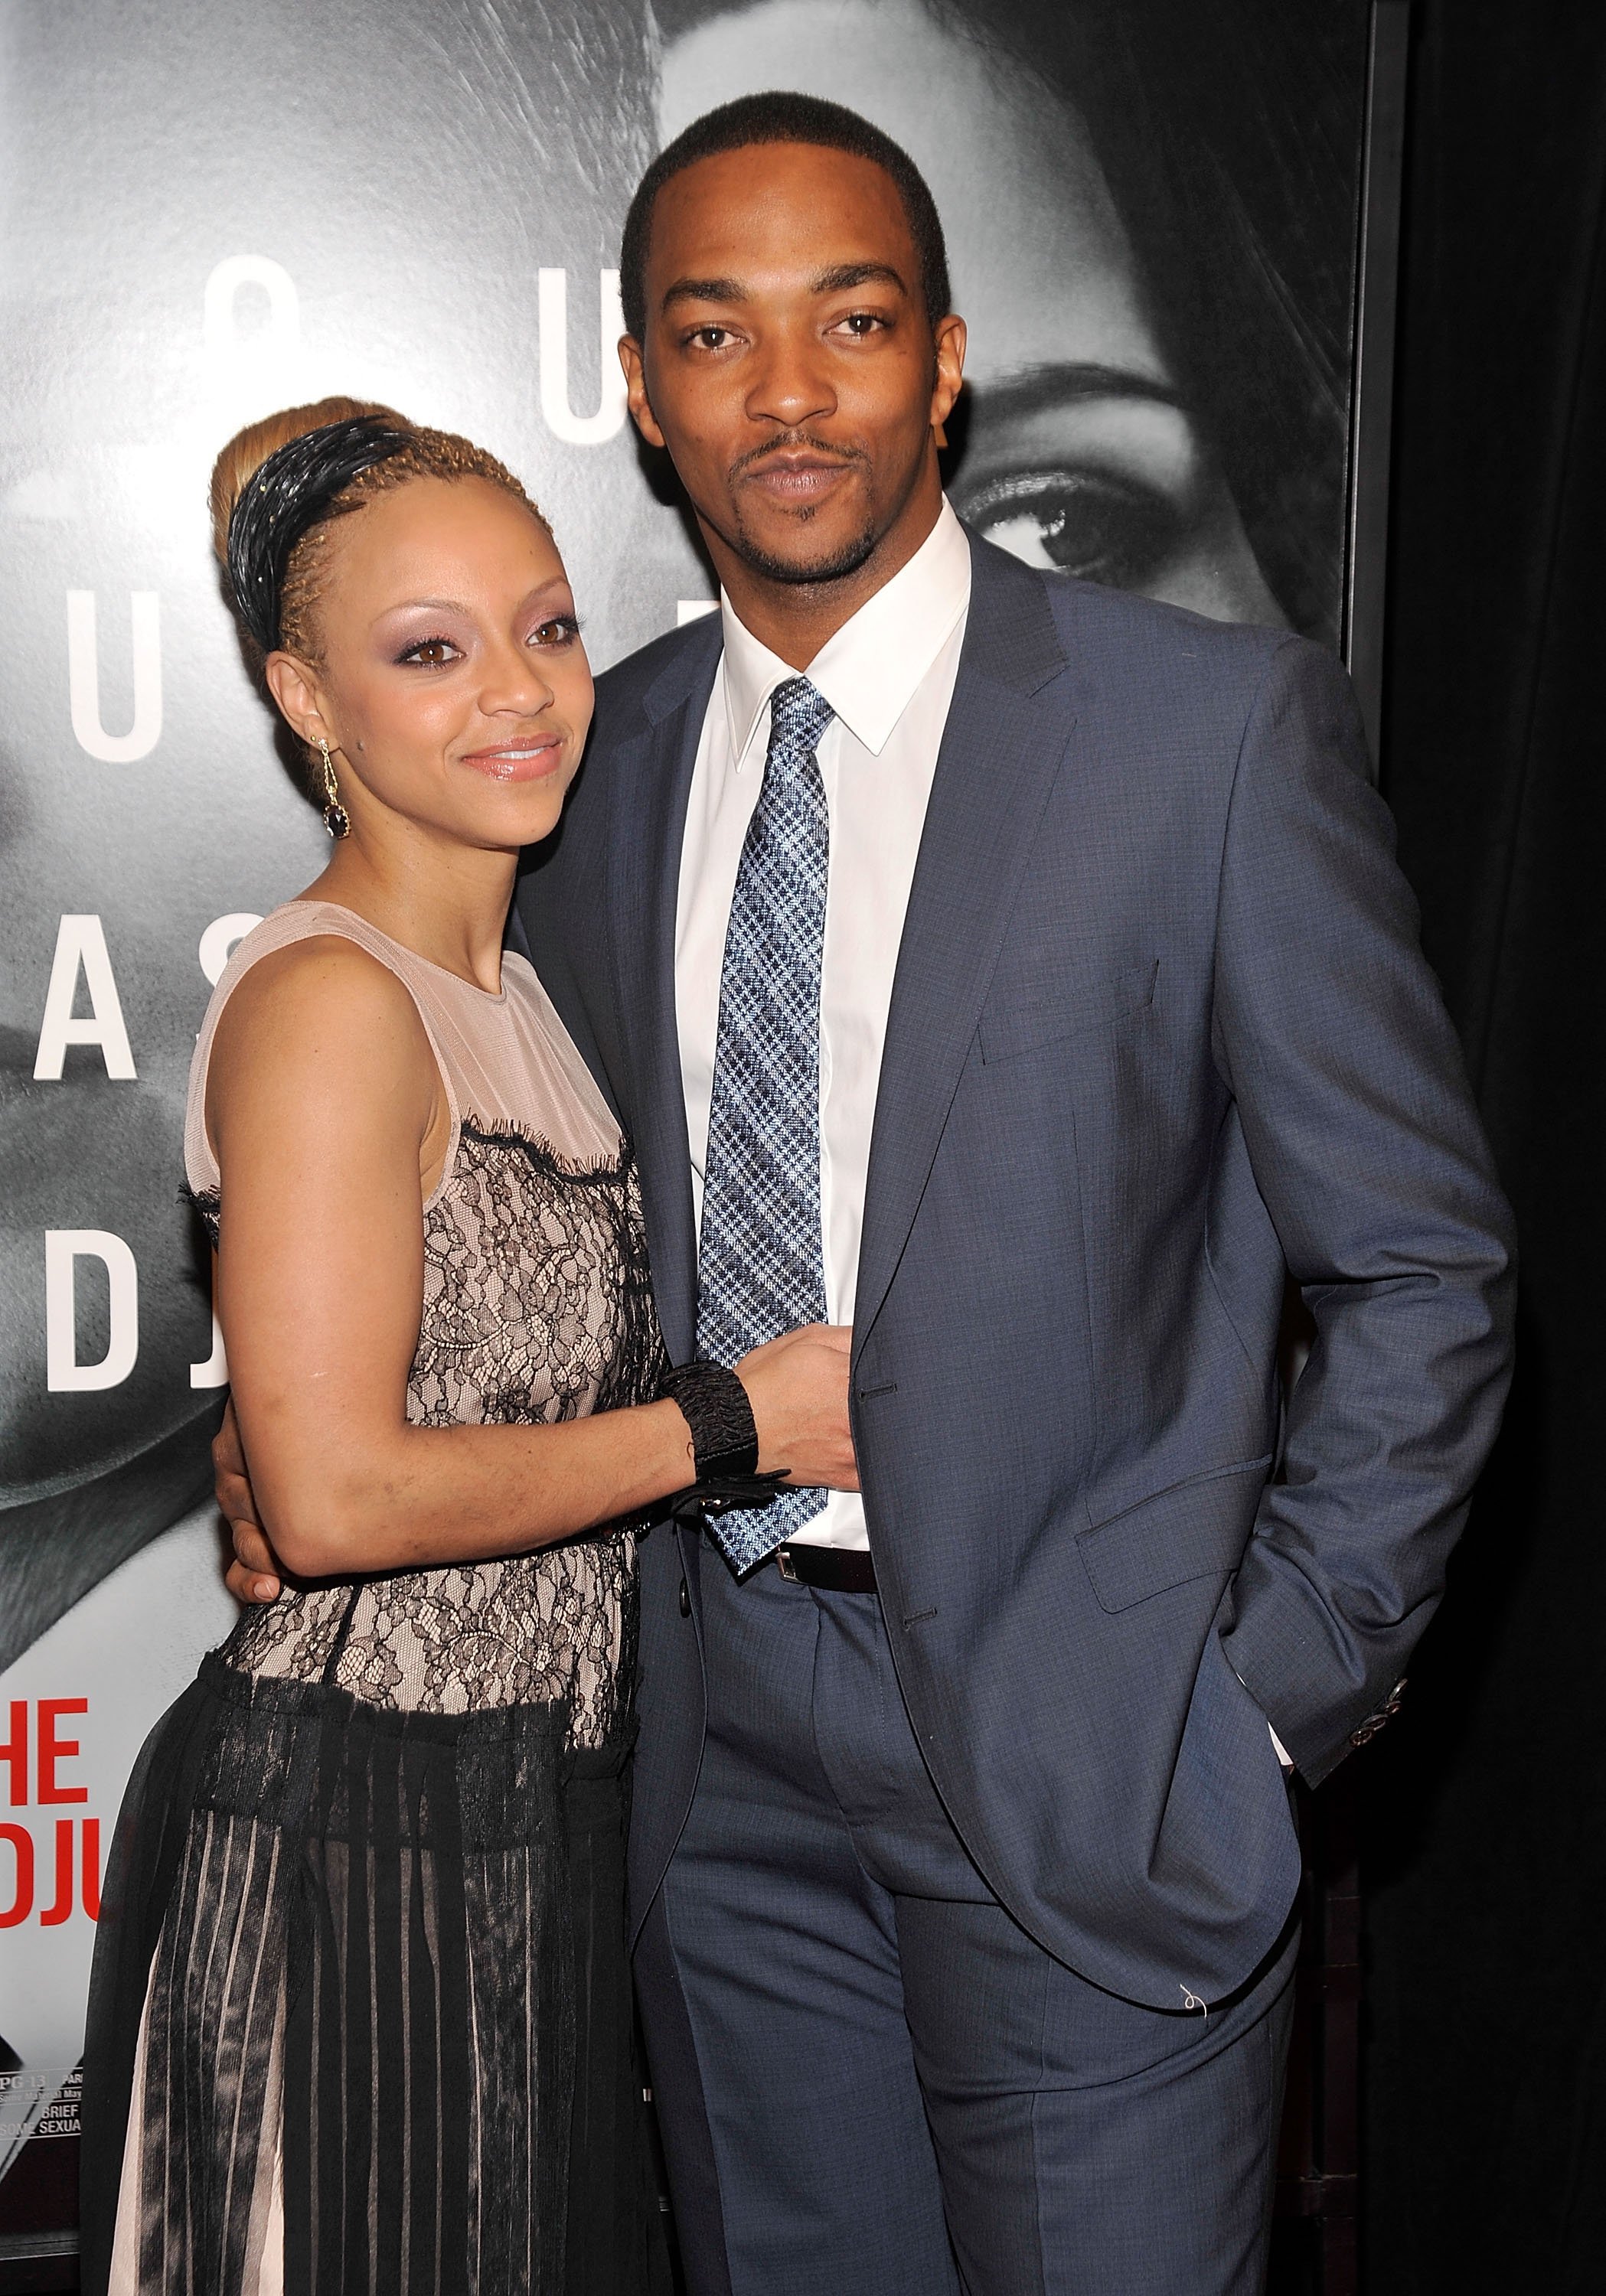 Anthony Mackie and Sheletta Chapital attend the premiere of "The Adjustment Bureau" on February 14, 2011, in New York City. | Source: Getty Images